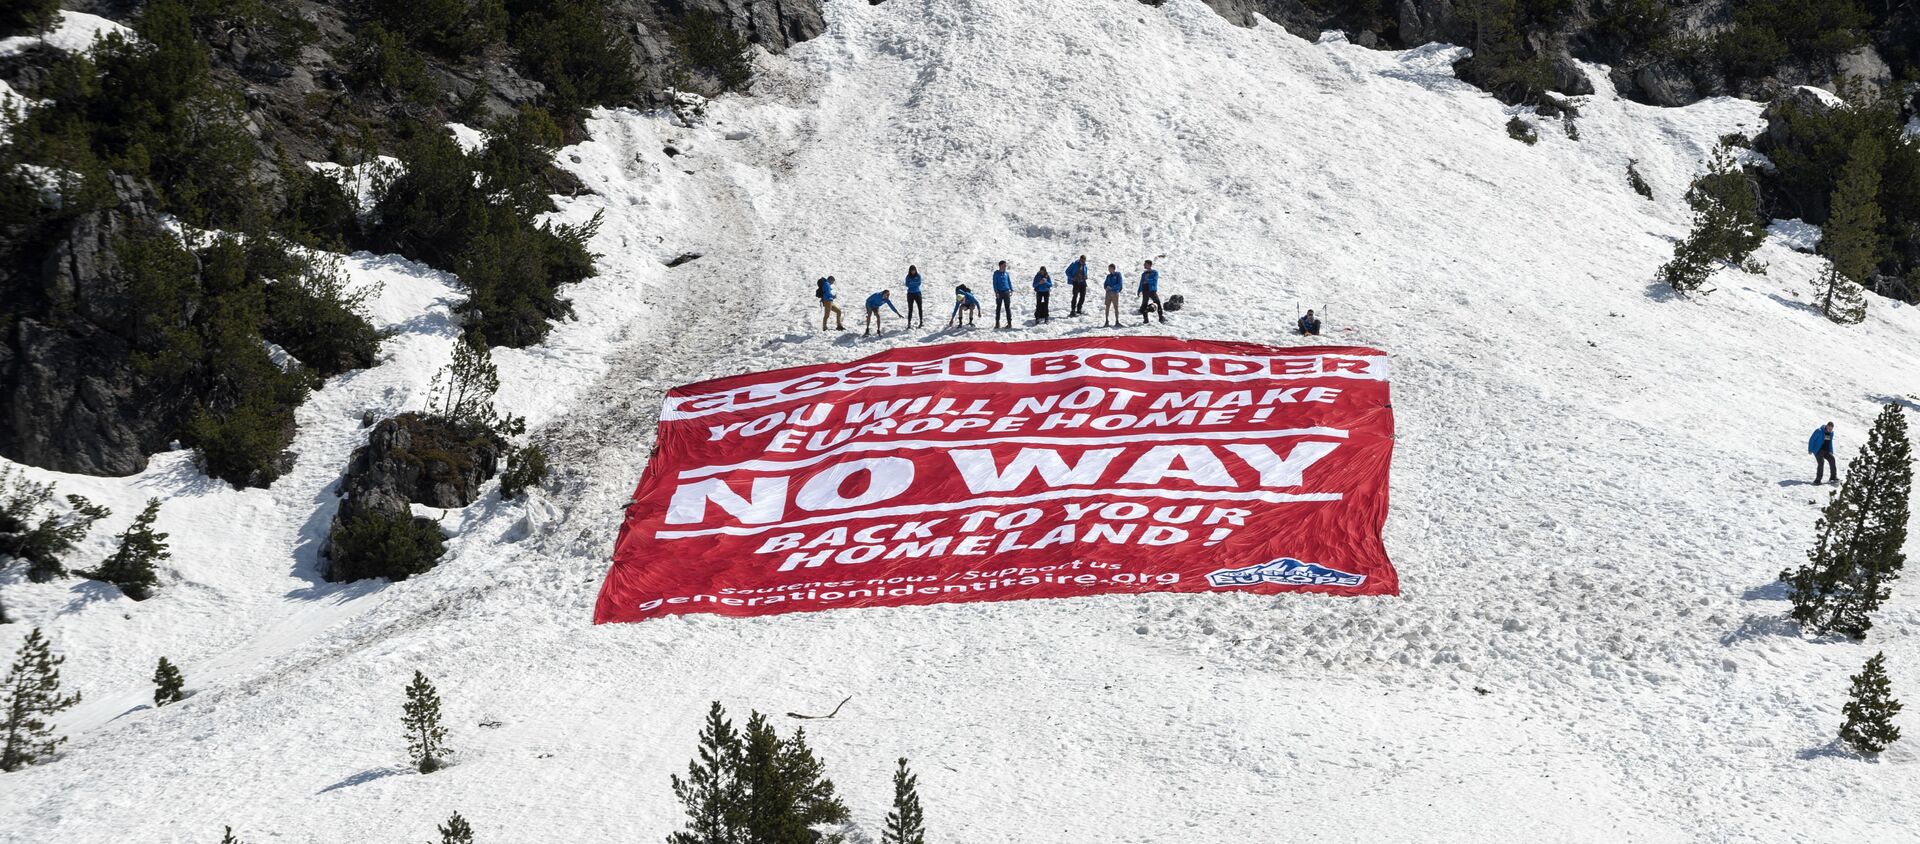 Activists from the French political movement Generation Identitaire (GI) and European anti-migrant group Defend Europe conduct an operation titled Mission Alpes to control access of migrants using the Col de l'Echelle mountain pass on 21 April 2018, in Nevache, near Briancon, on the French-Italian border. Photo by ROMAIN LAFABREGUE / AFP - Sputnik International, 1920, 14.02.2021